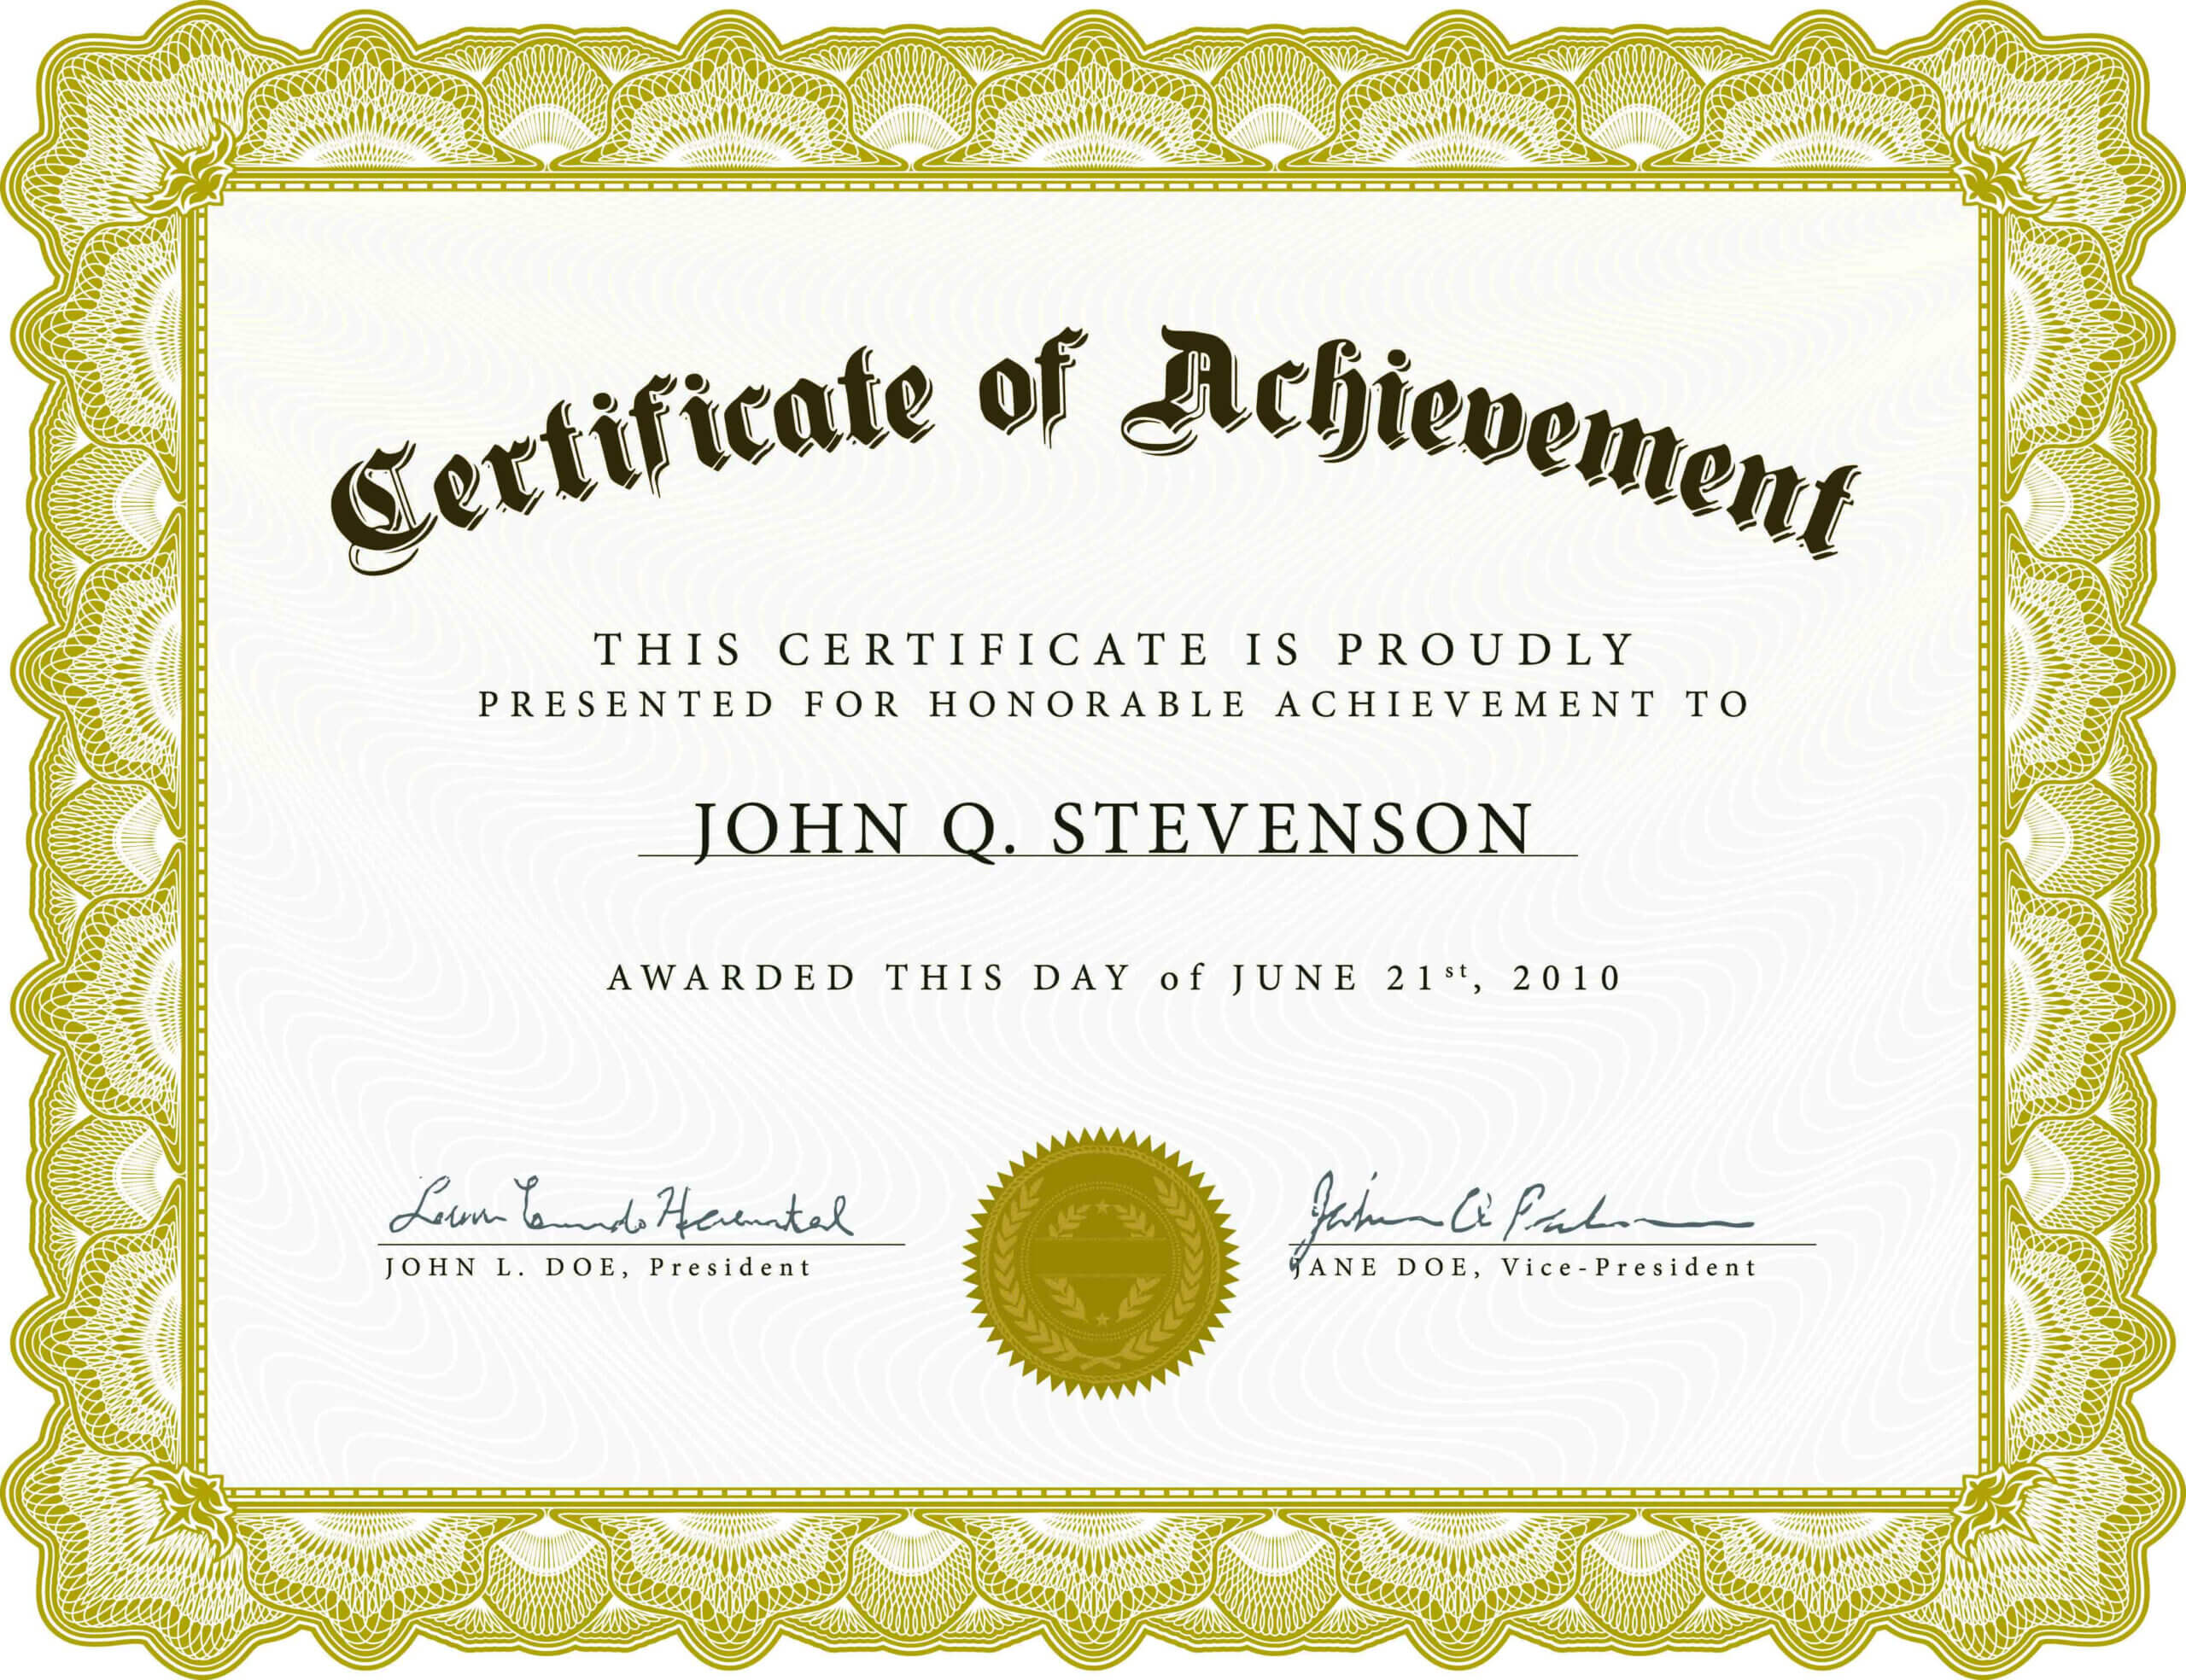 Certificate Of Academic Achievement Template | Photo Stock Pertaining To Professional Award Certificate Template